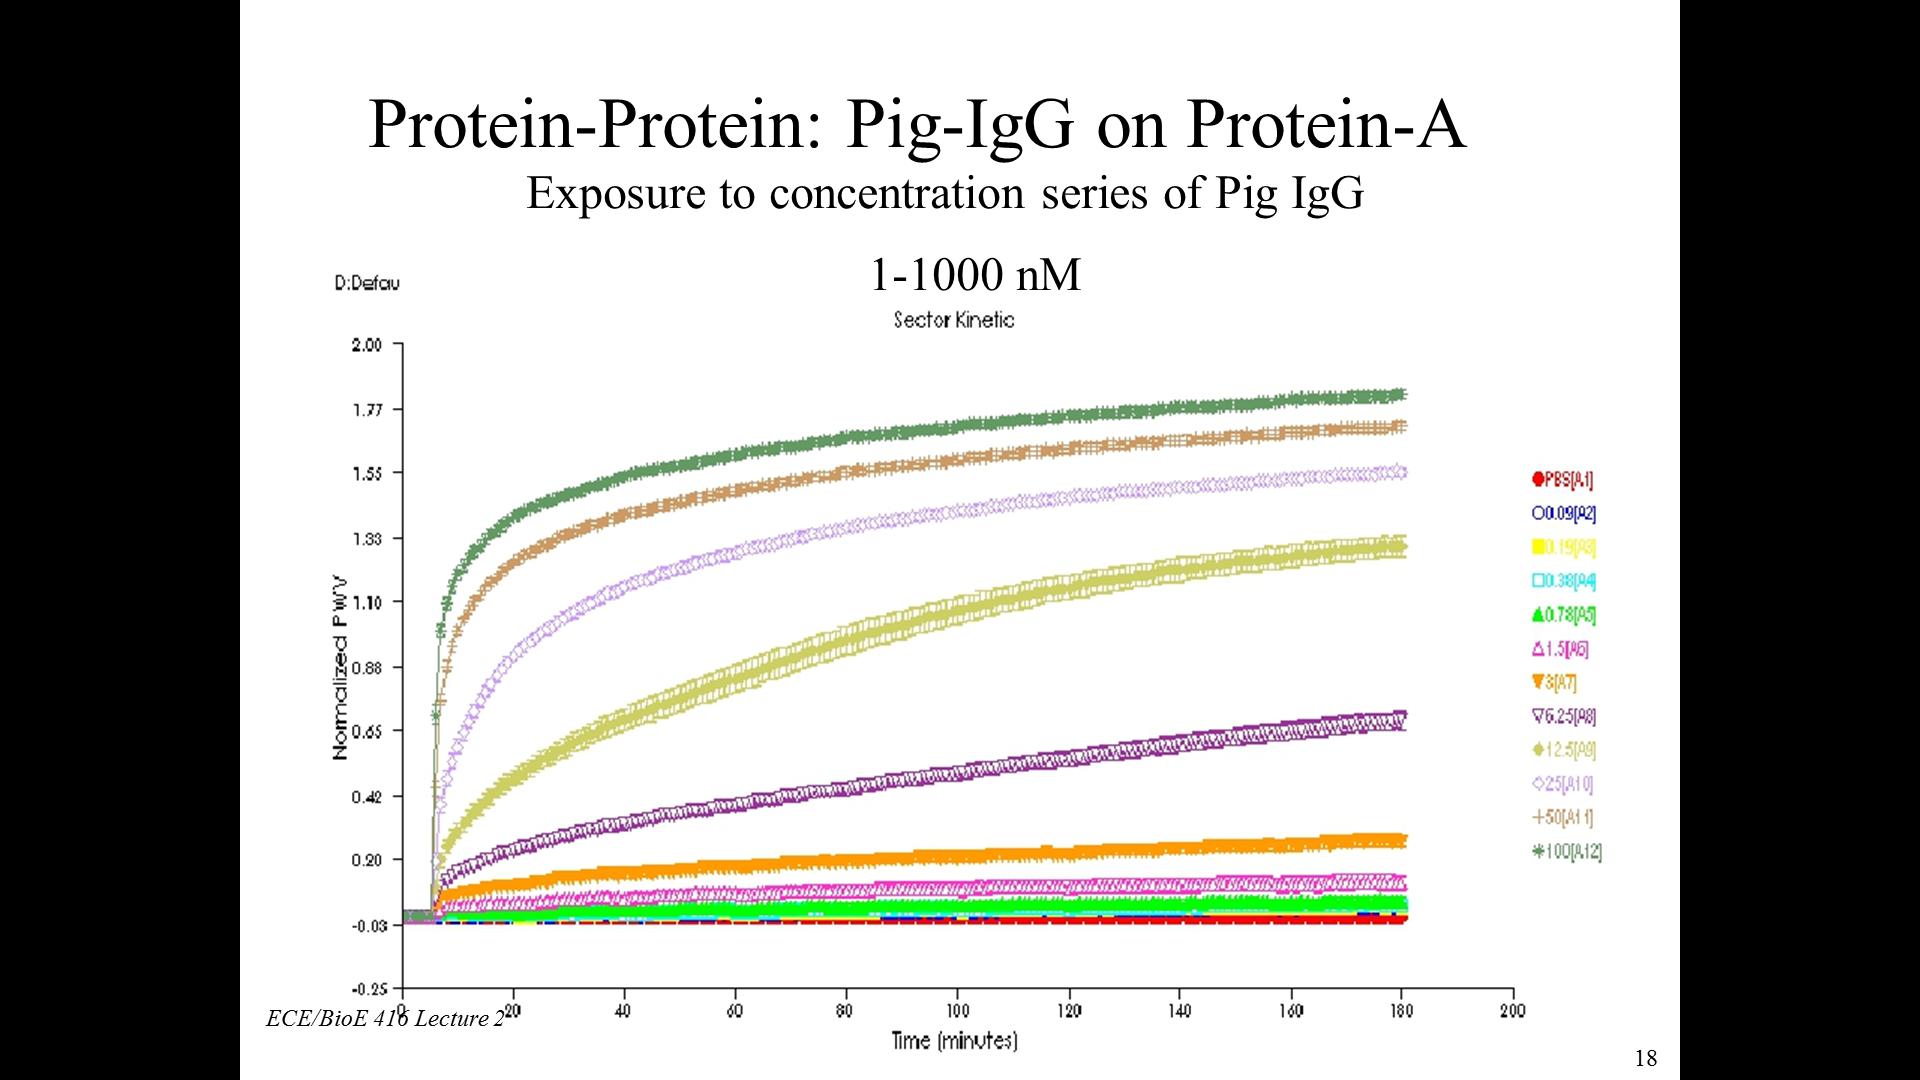 Protein-Protein: Pig-IgG on Protien-A